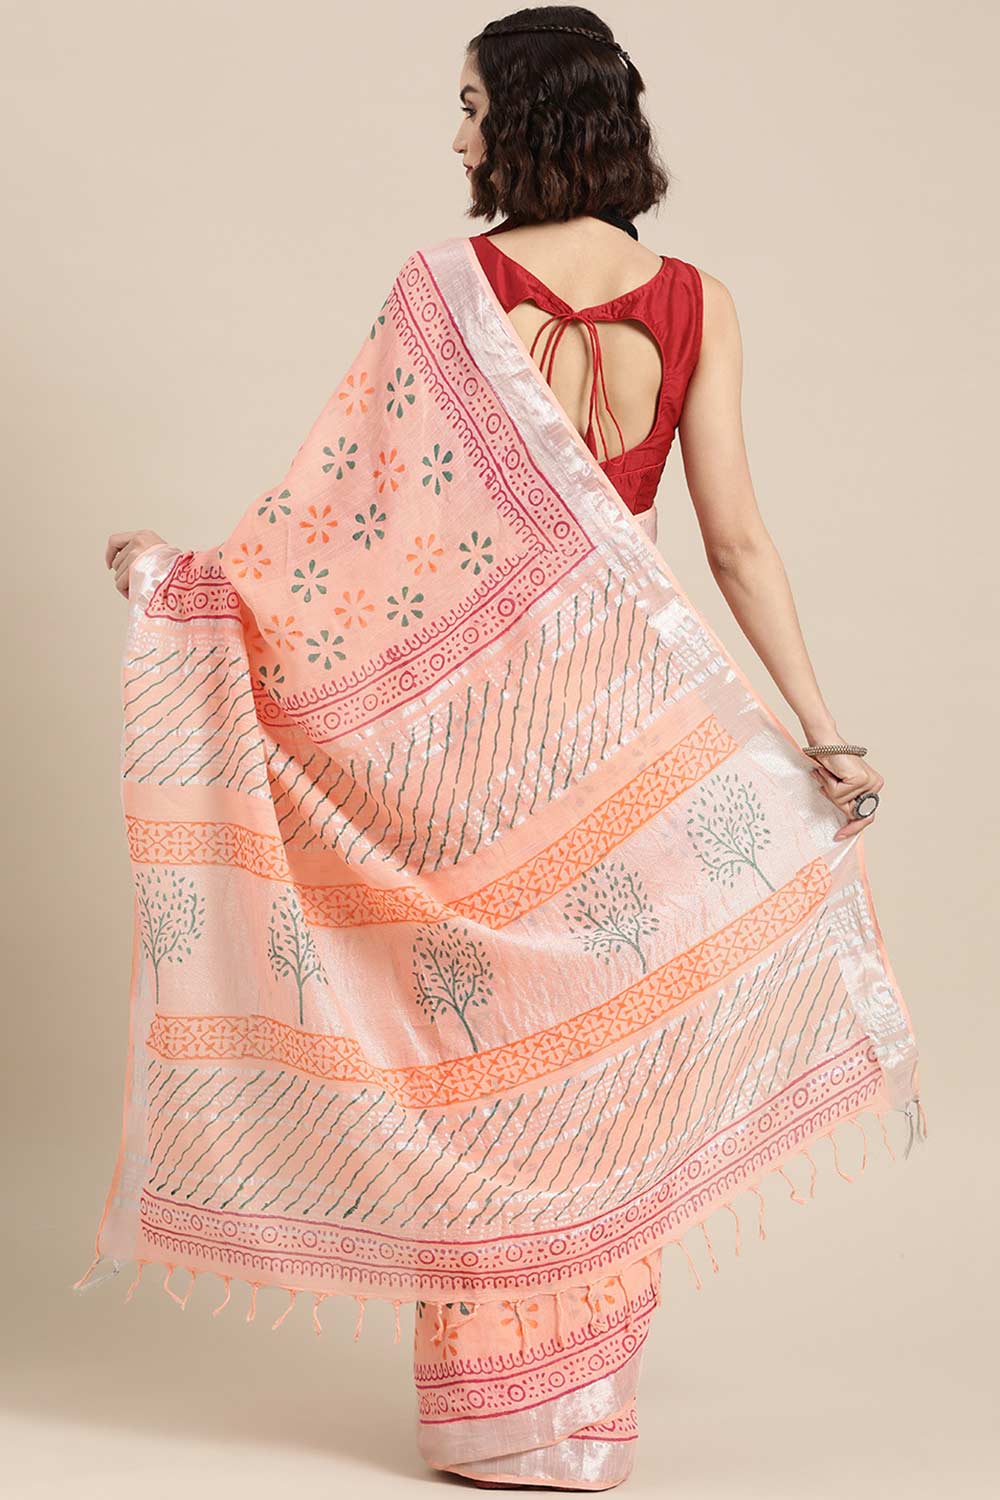 Shop Uma Peach Block Printed Linen One Minute Saree at best offer at our  Store - One Minute Saree